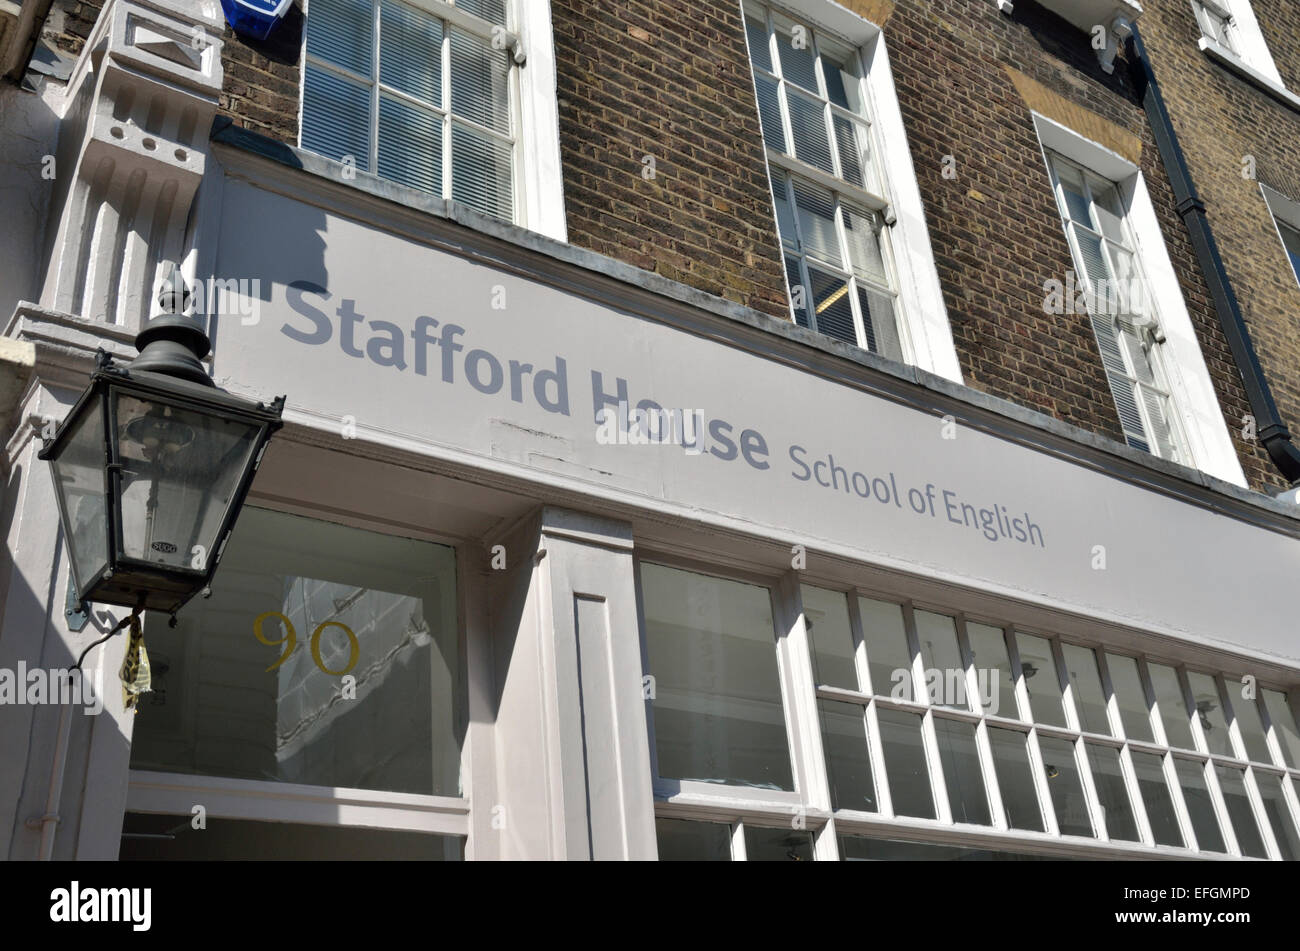 Stafford House School of English à Bloomsbury, Londres, UK Banque D'Images